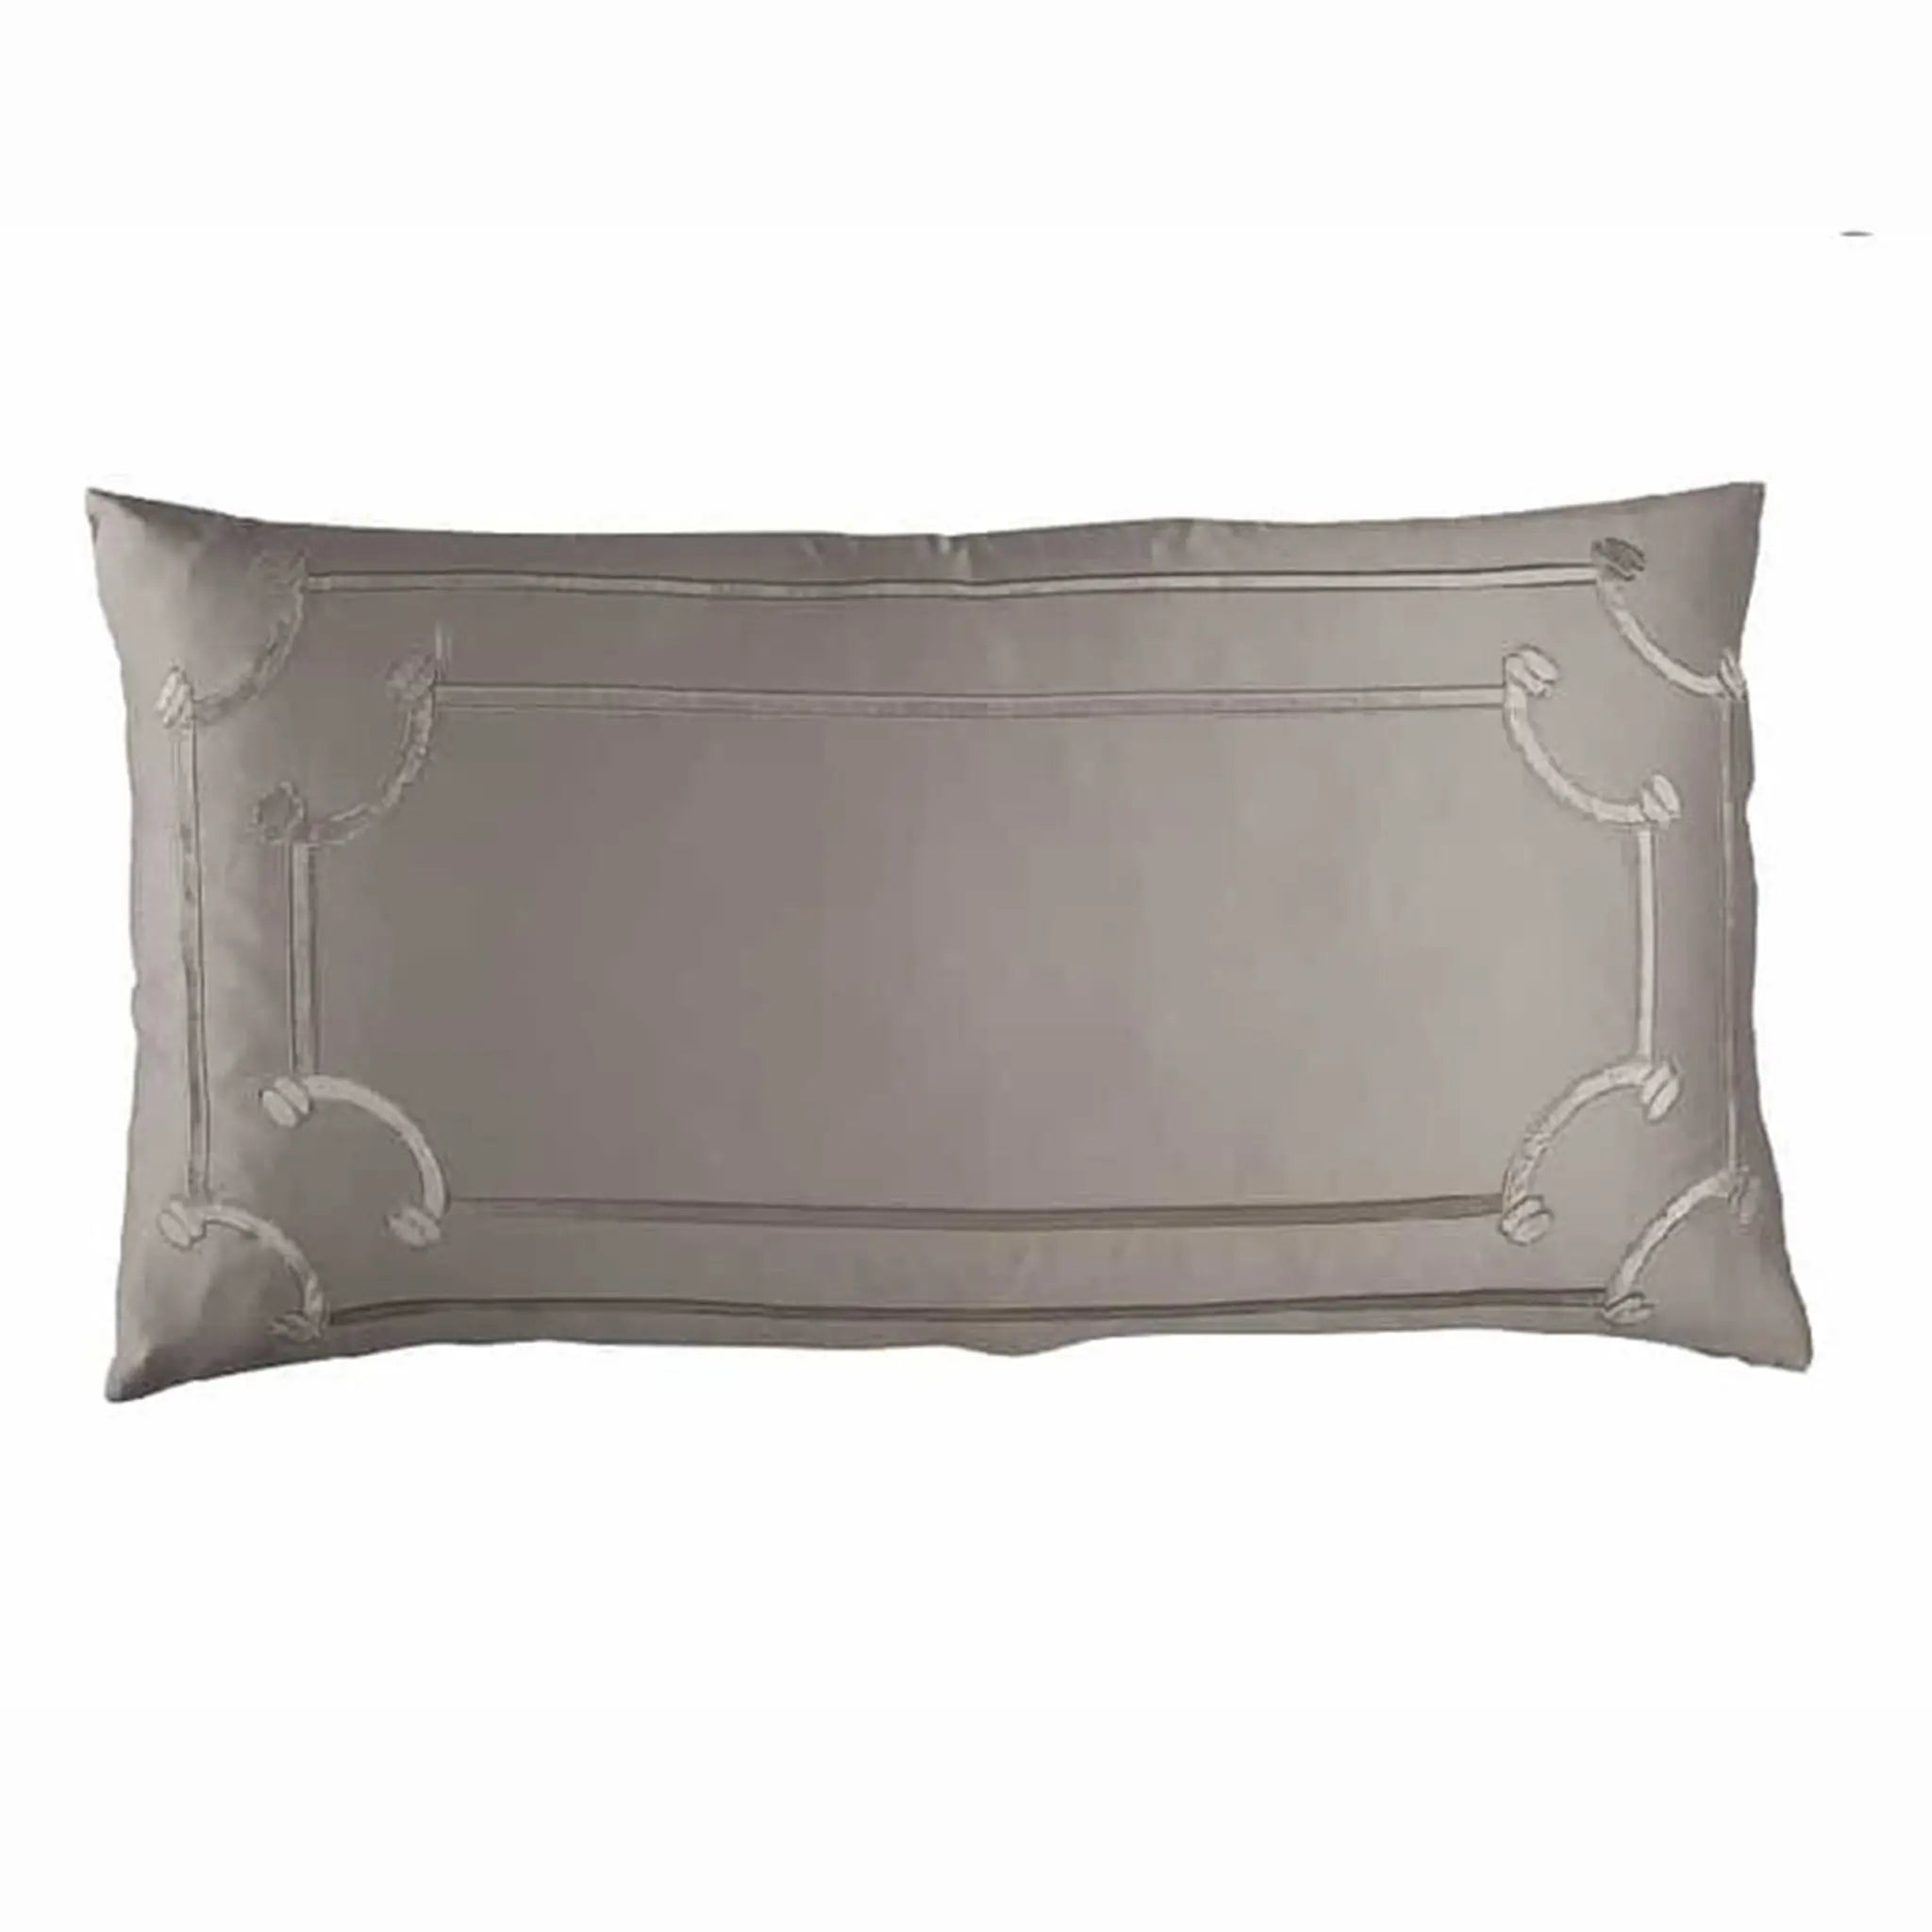 Lili Alessandra Vendome king Pillow in Taupe and Fawn